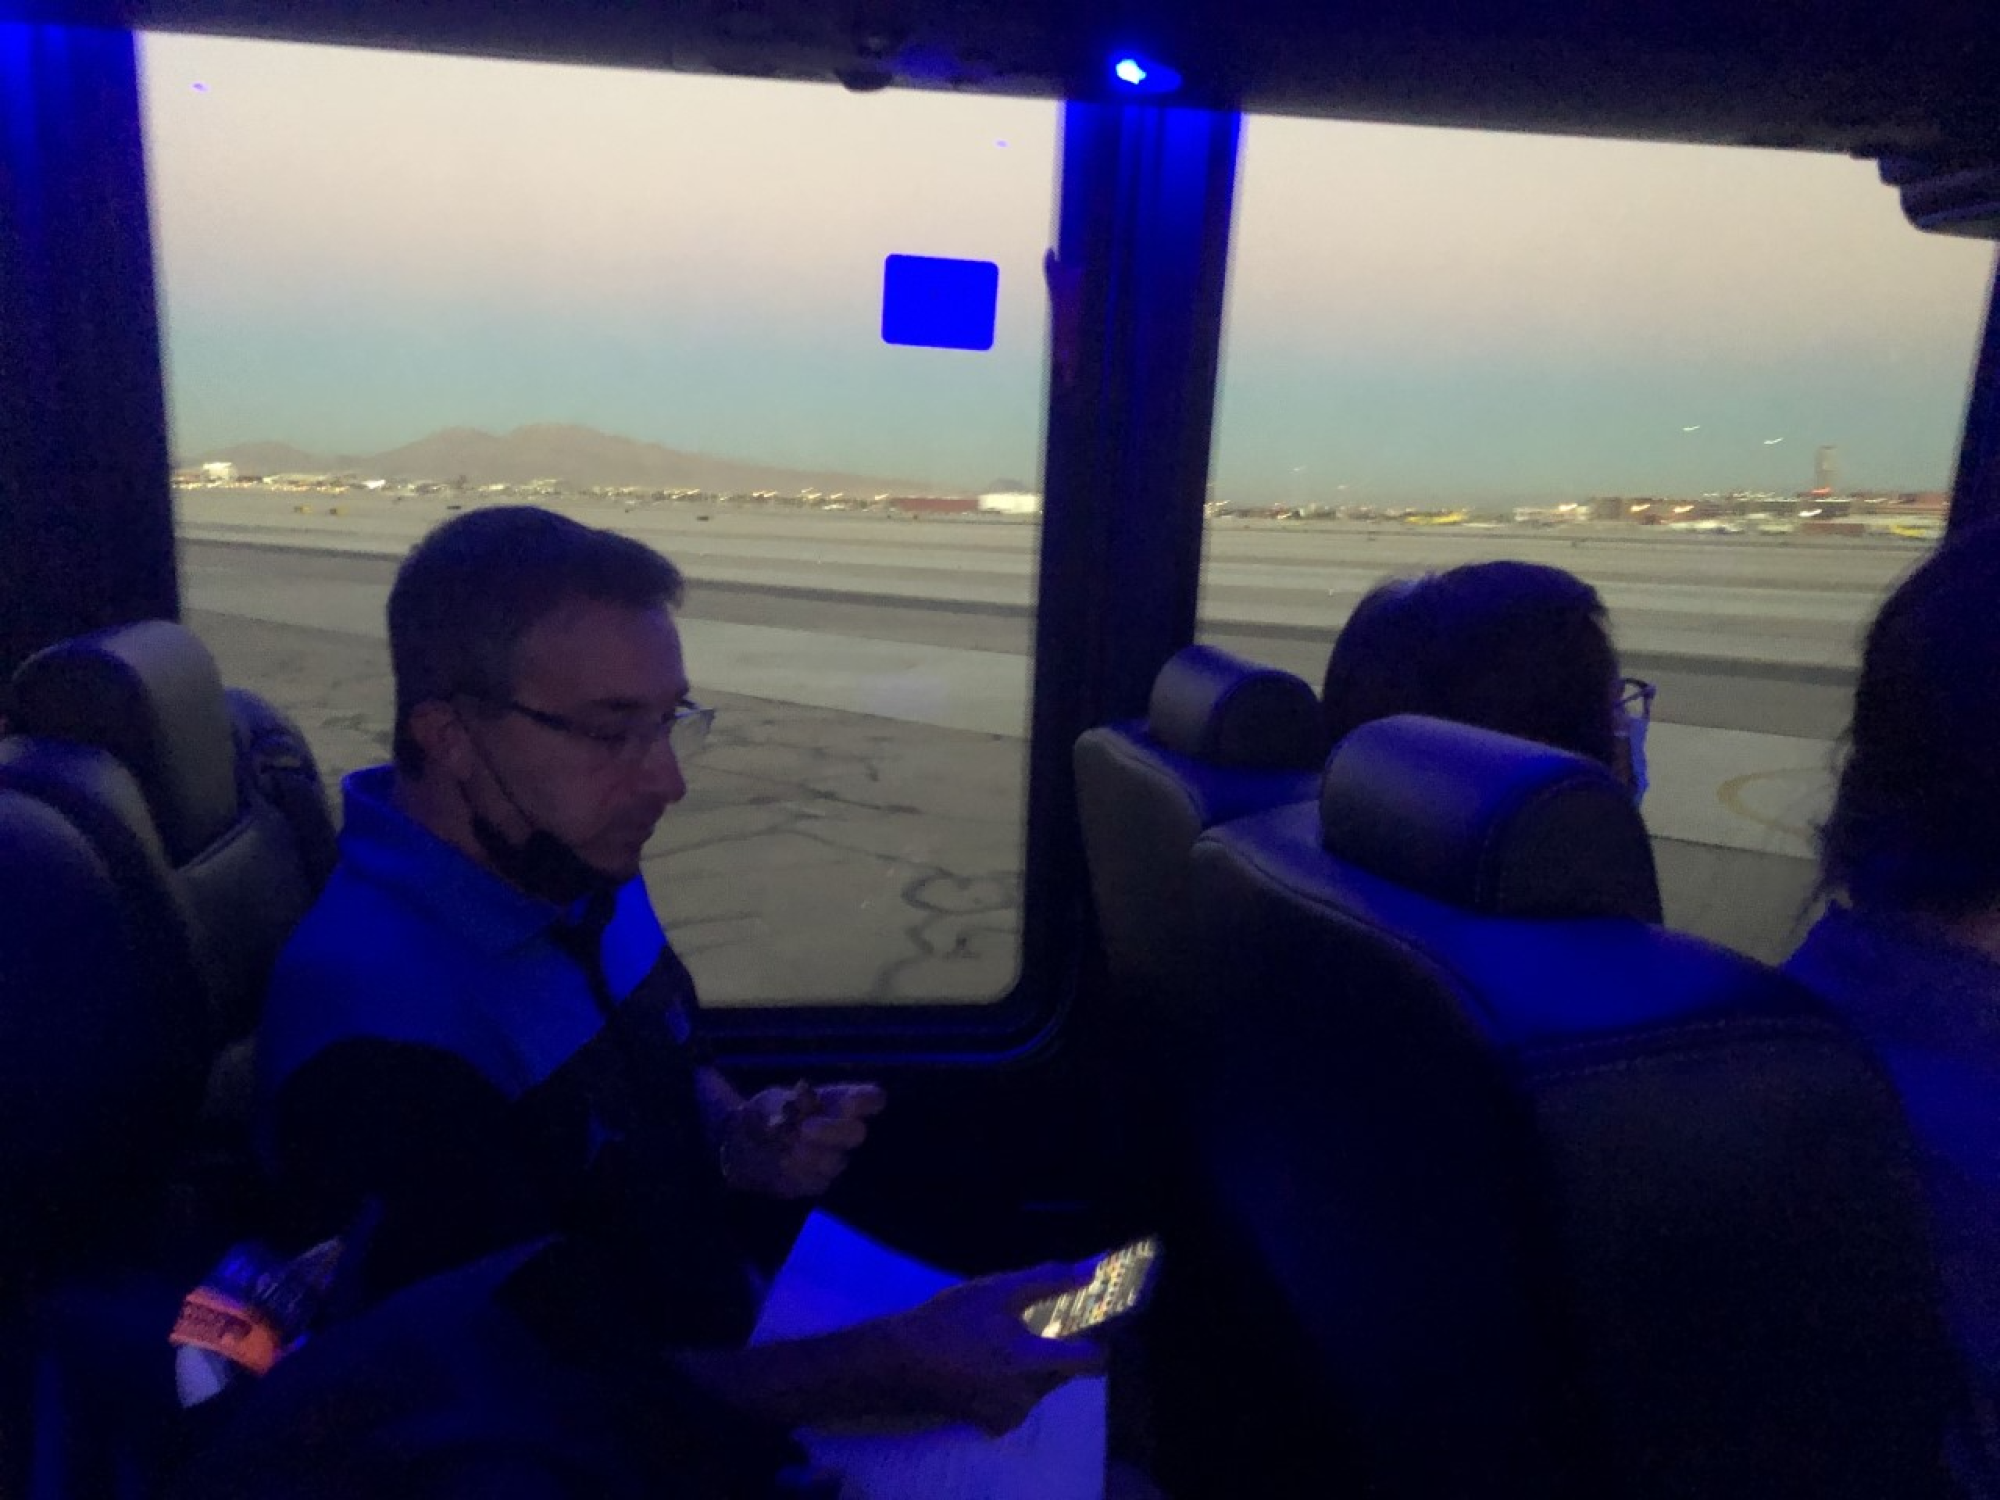 Josh Lewin checks his phone at 4:40 p.m. as he rides a shuttle to the plane waiting to take him to Burbank.